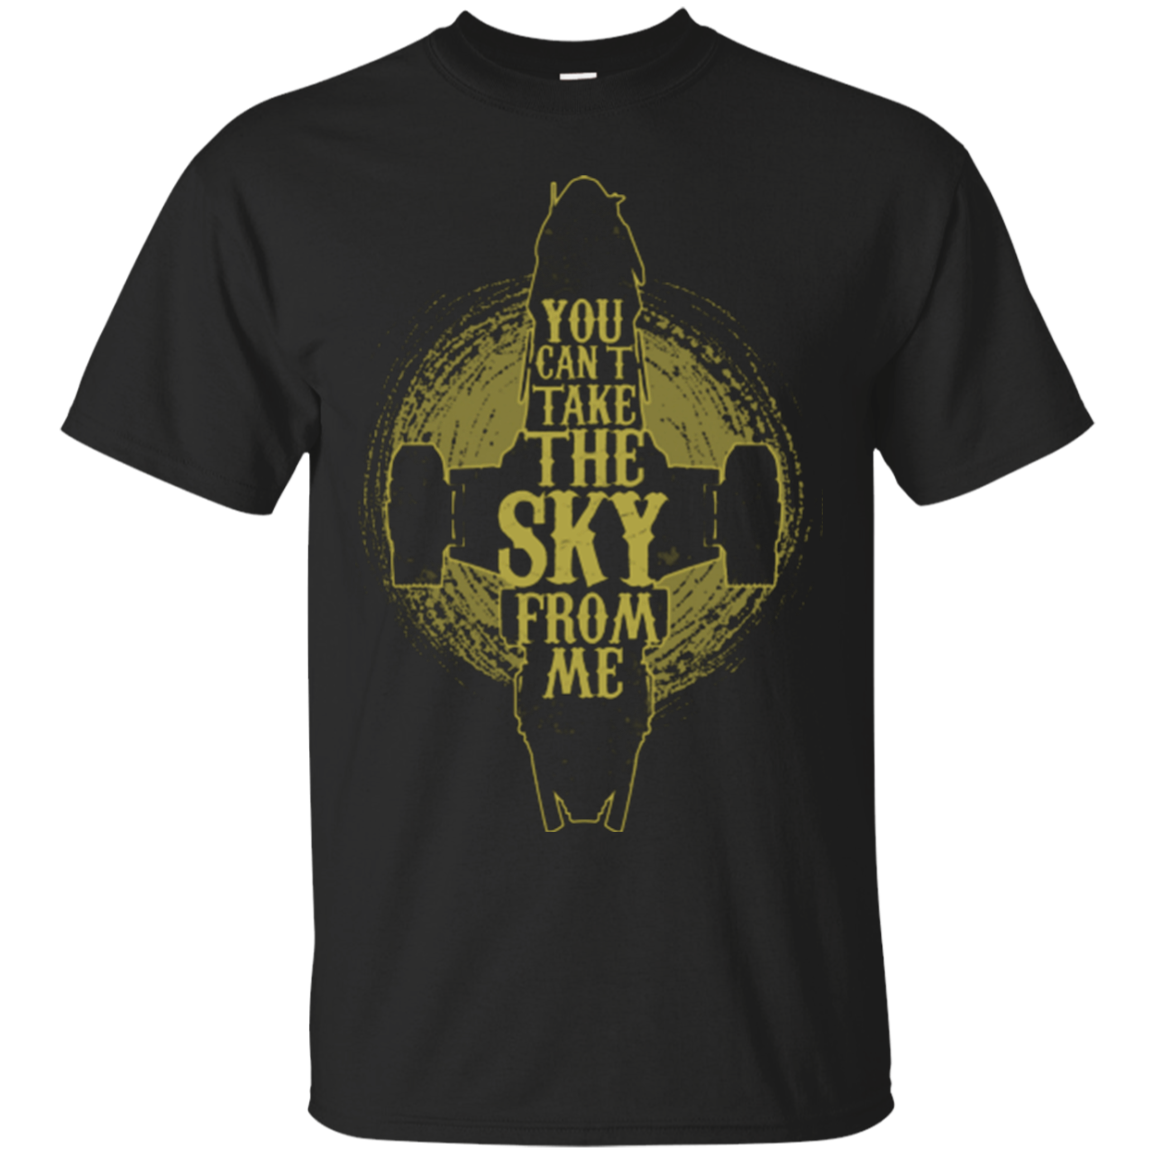 Can't take the sky T-Shirt